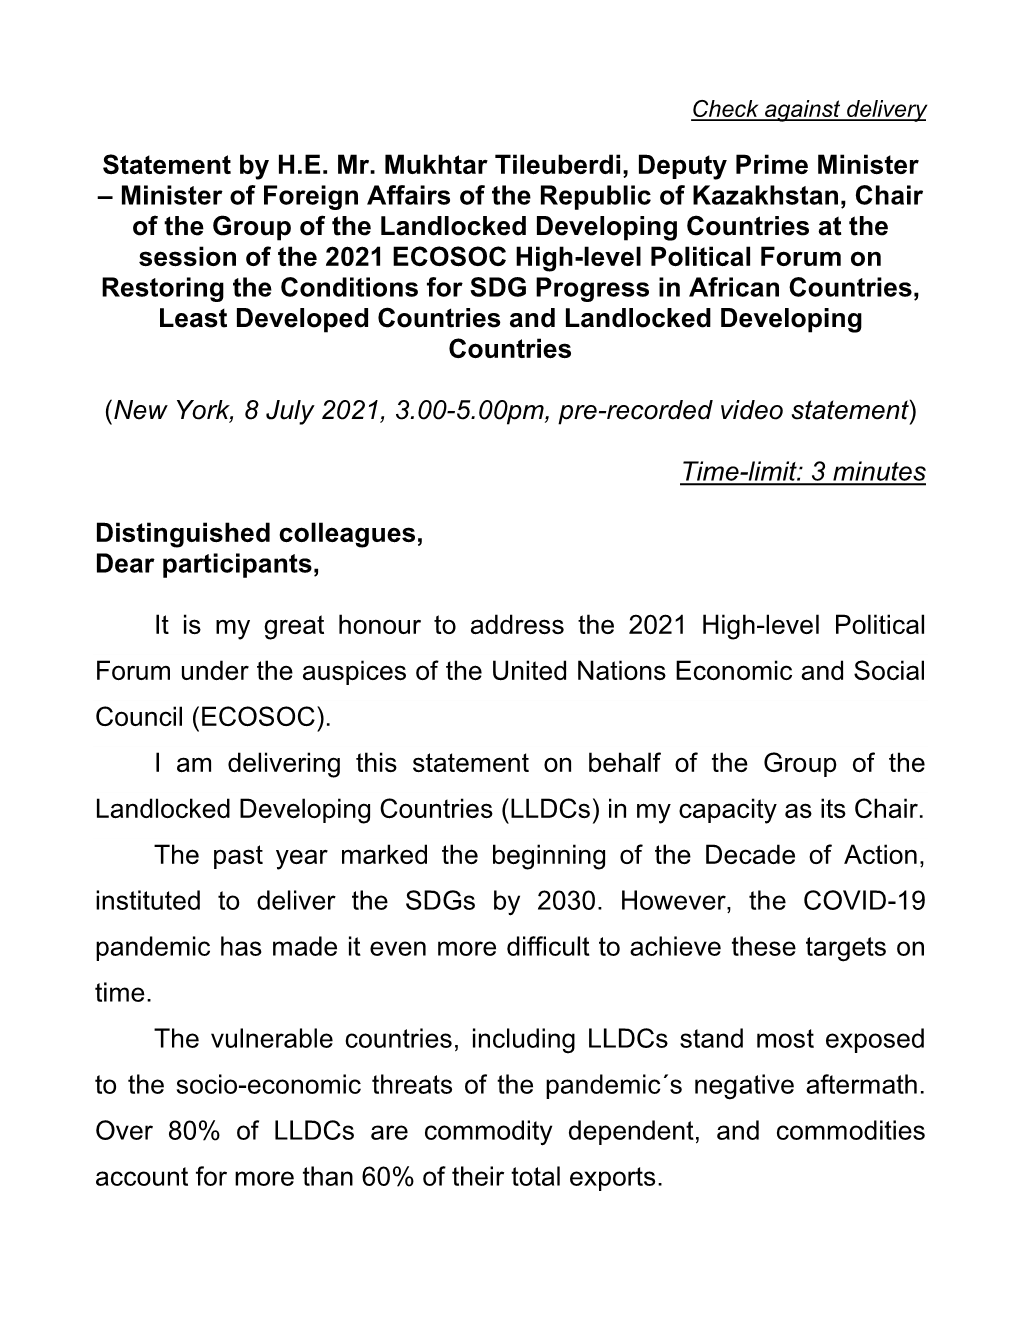 Statement by H.E. Mr. Mukhtar Tileuberdi, Deputy Prime Minister – Minister of Foreign Affairs of the Republic of Kazakhstan, C